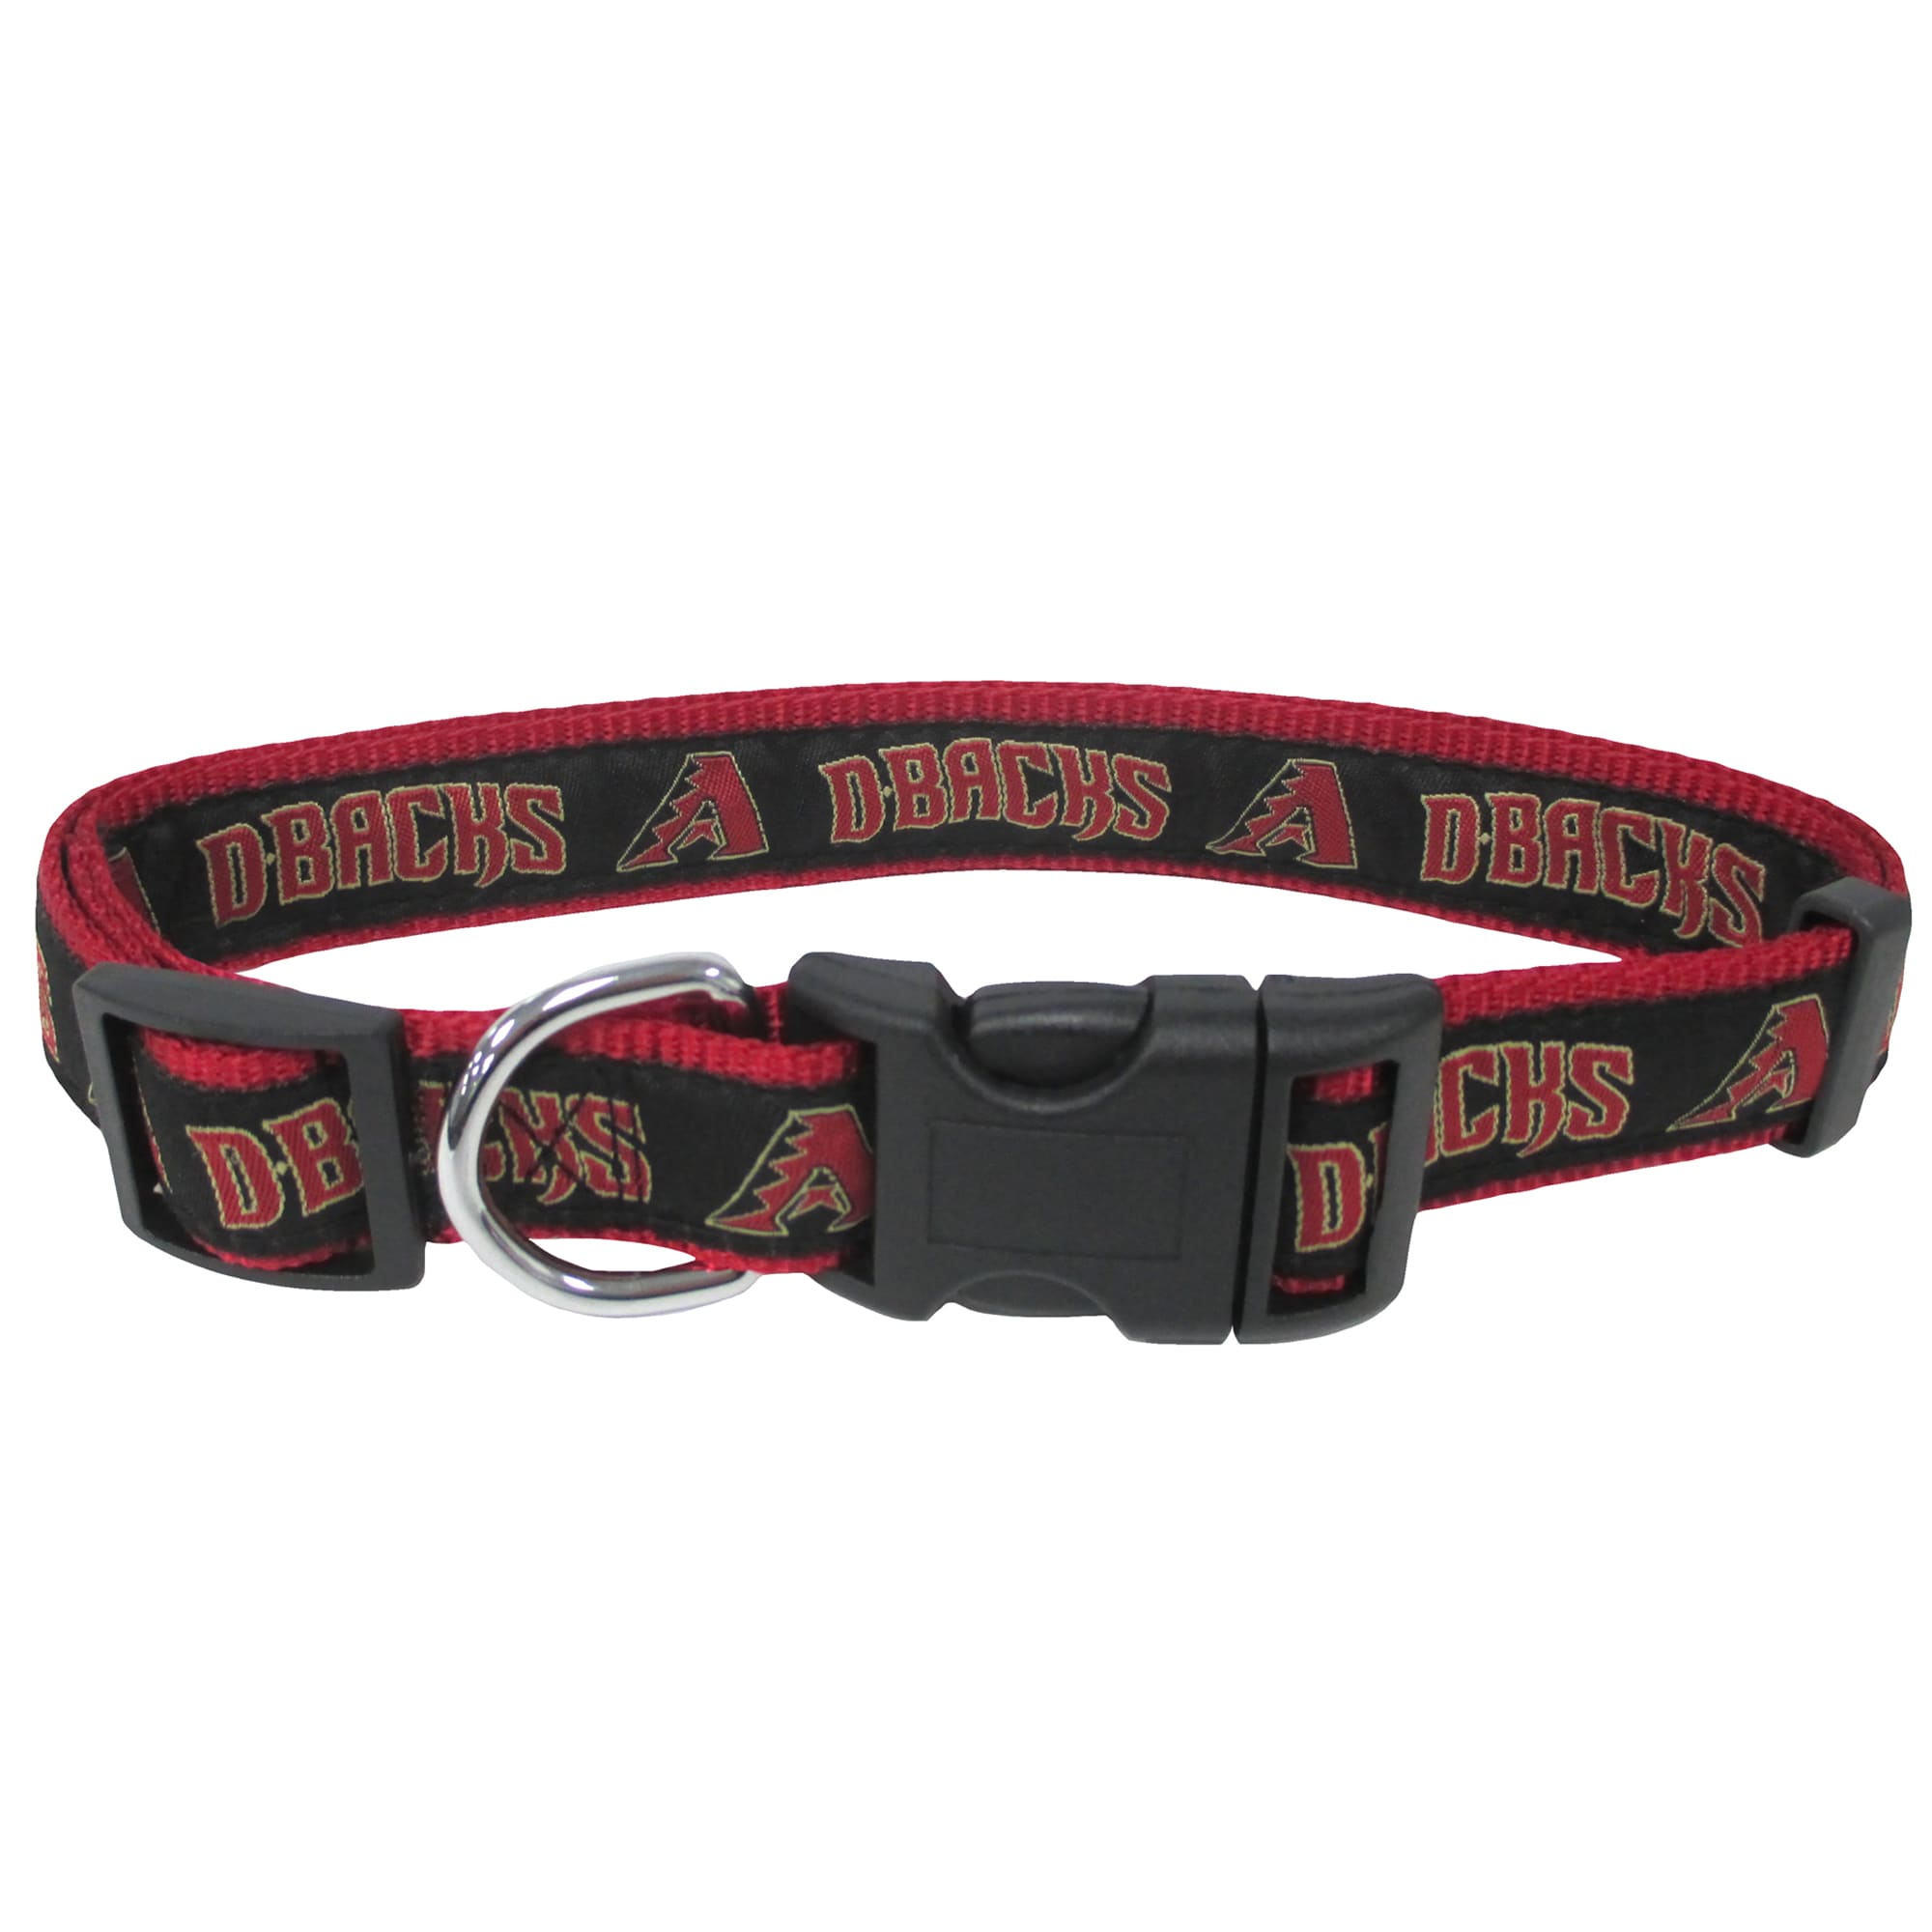 Official MLB Pet Gear, MLB Collars, Leashes, Chew Toys